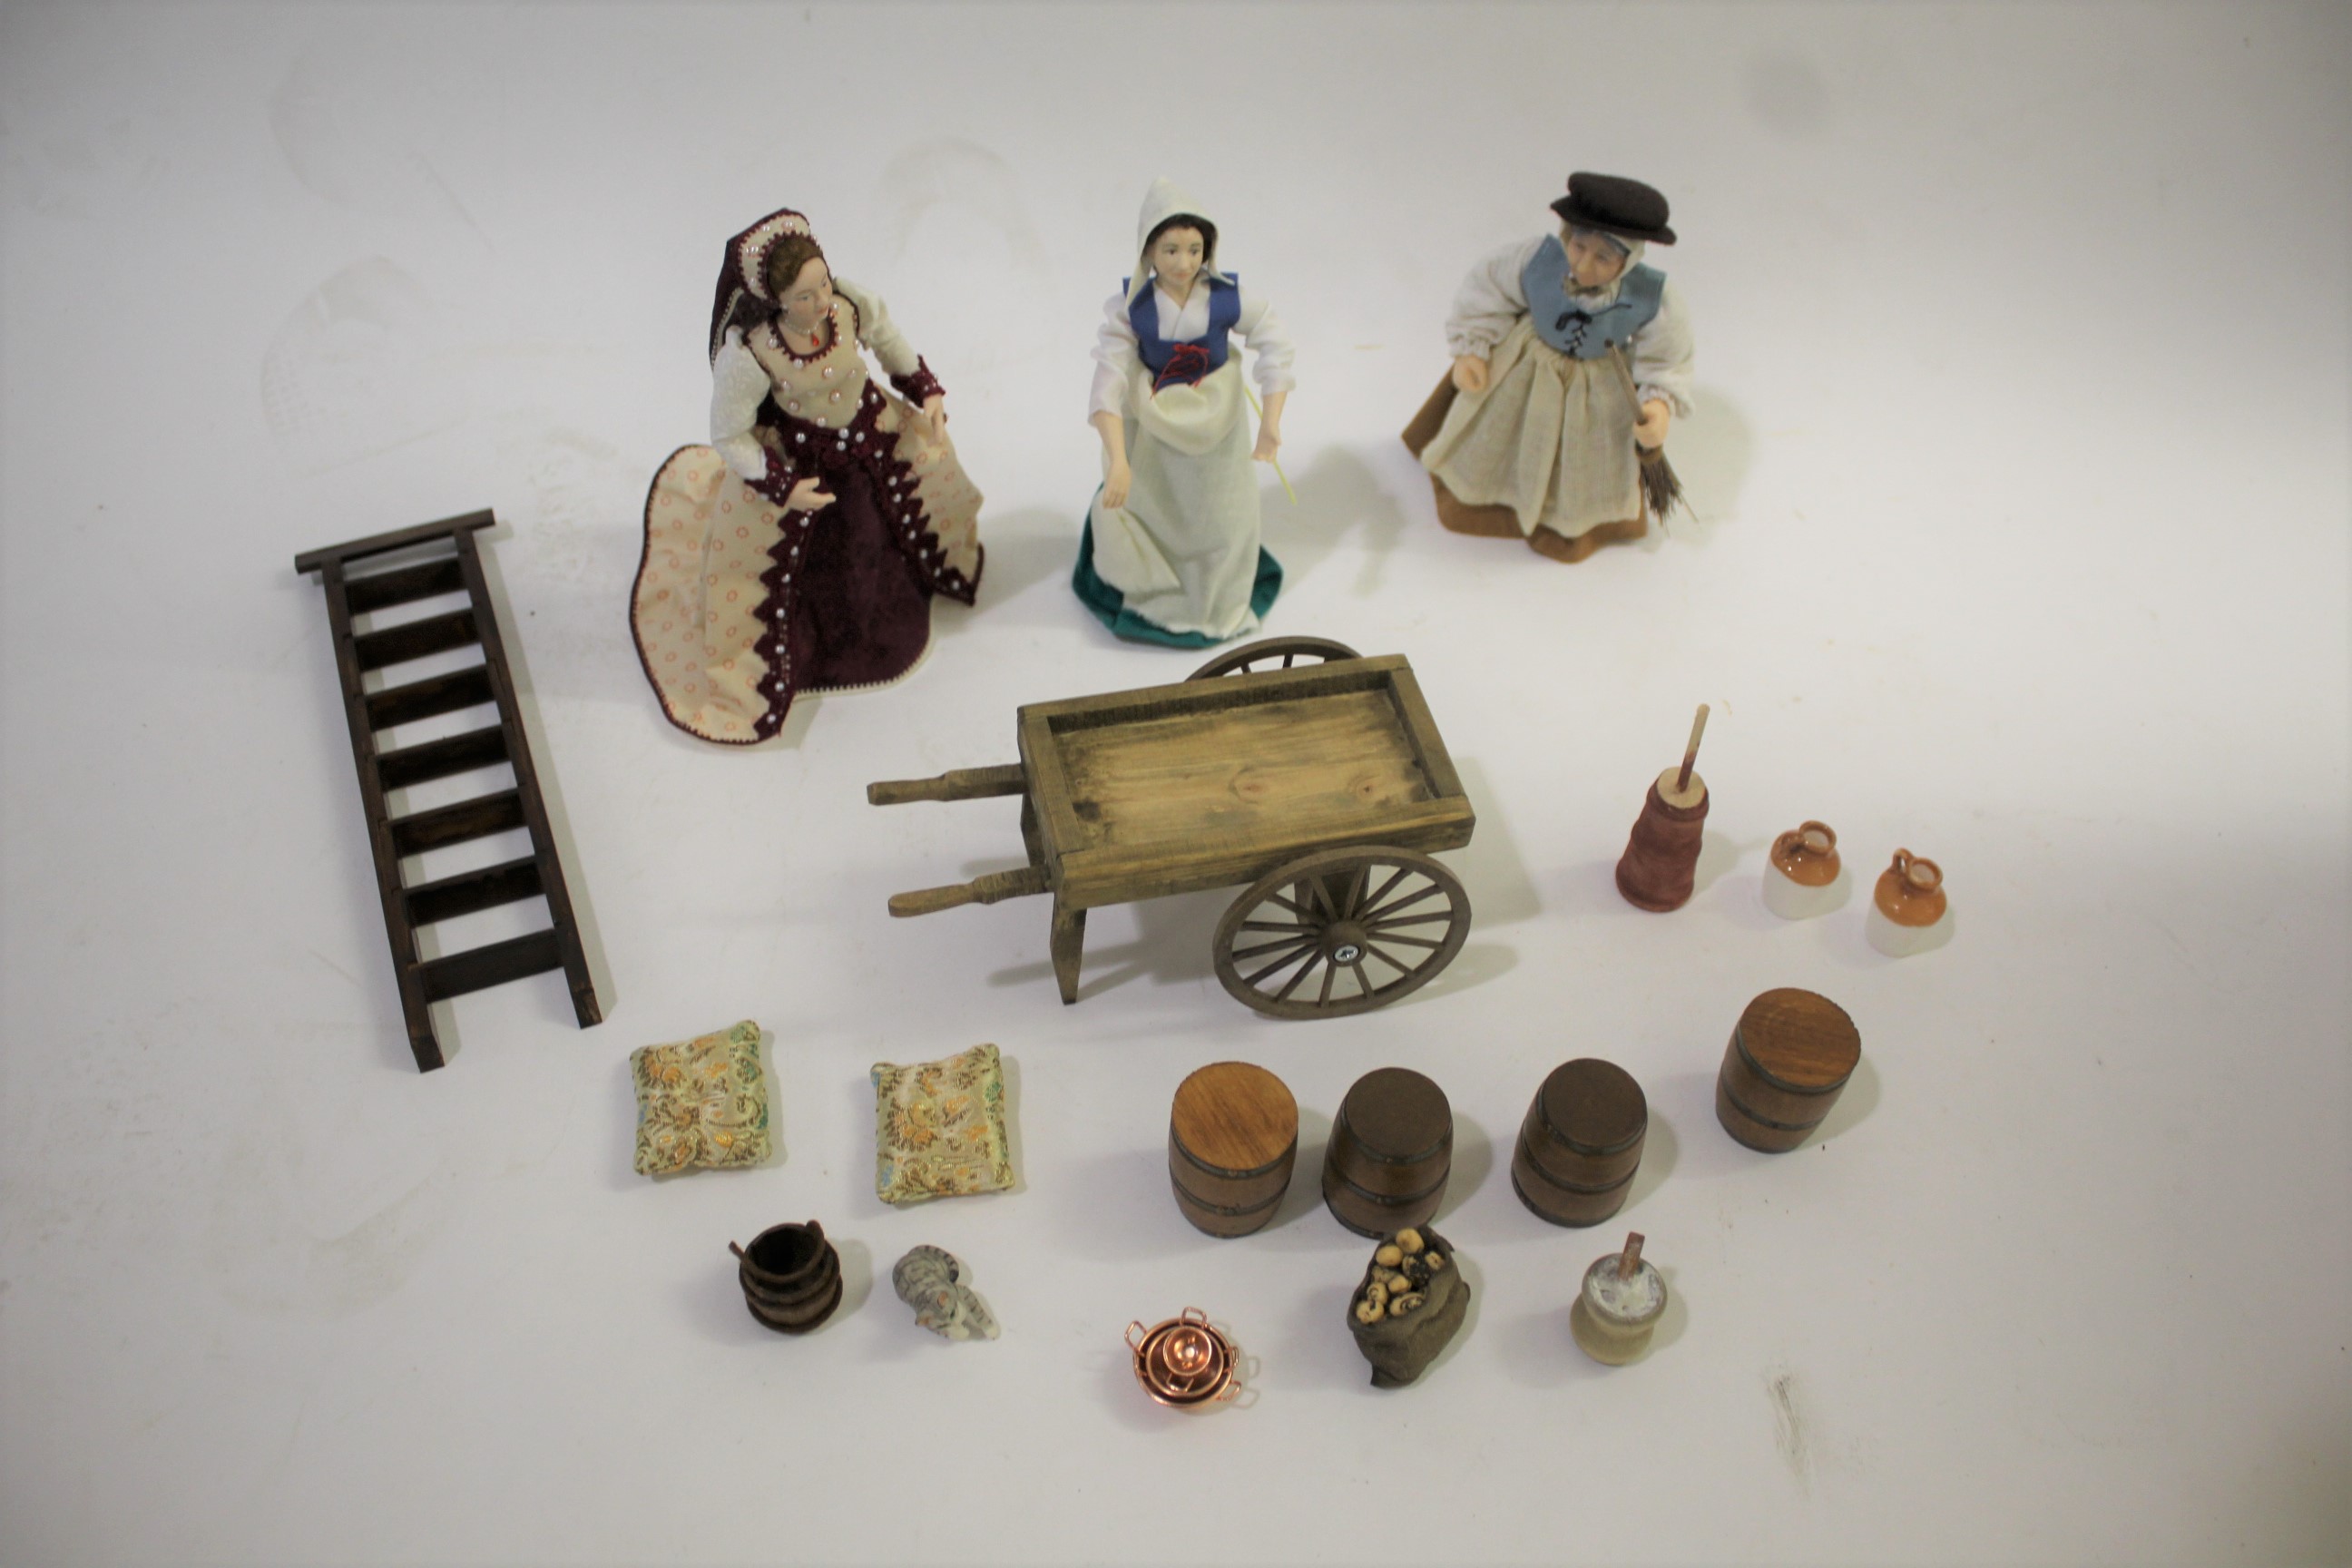 TUDOR STYLE MODERN DOLLS HOUSE & CONTENTS a modern 3 storey wooden dolls house in the Tudor style, - Image 8 of 11